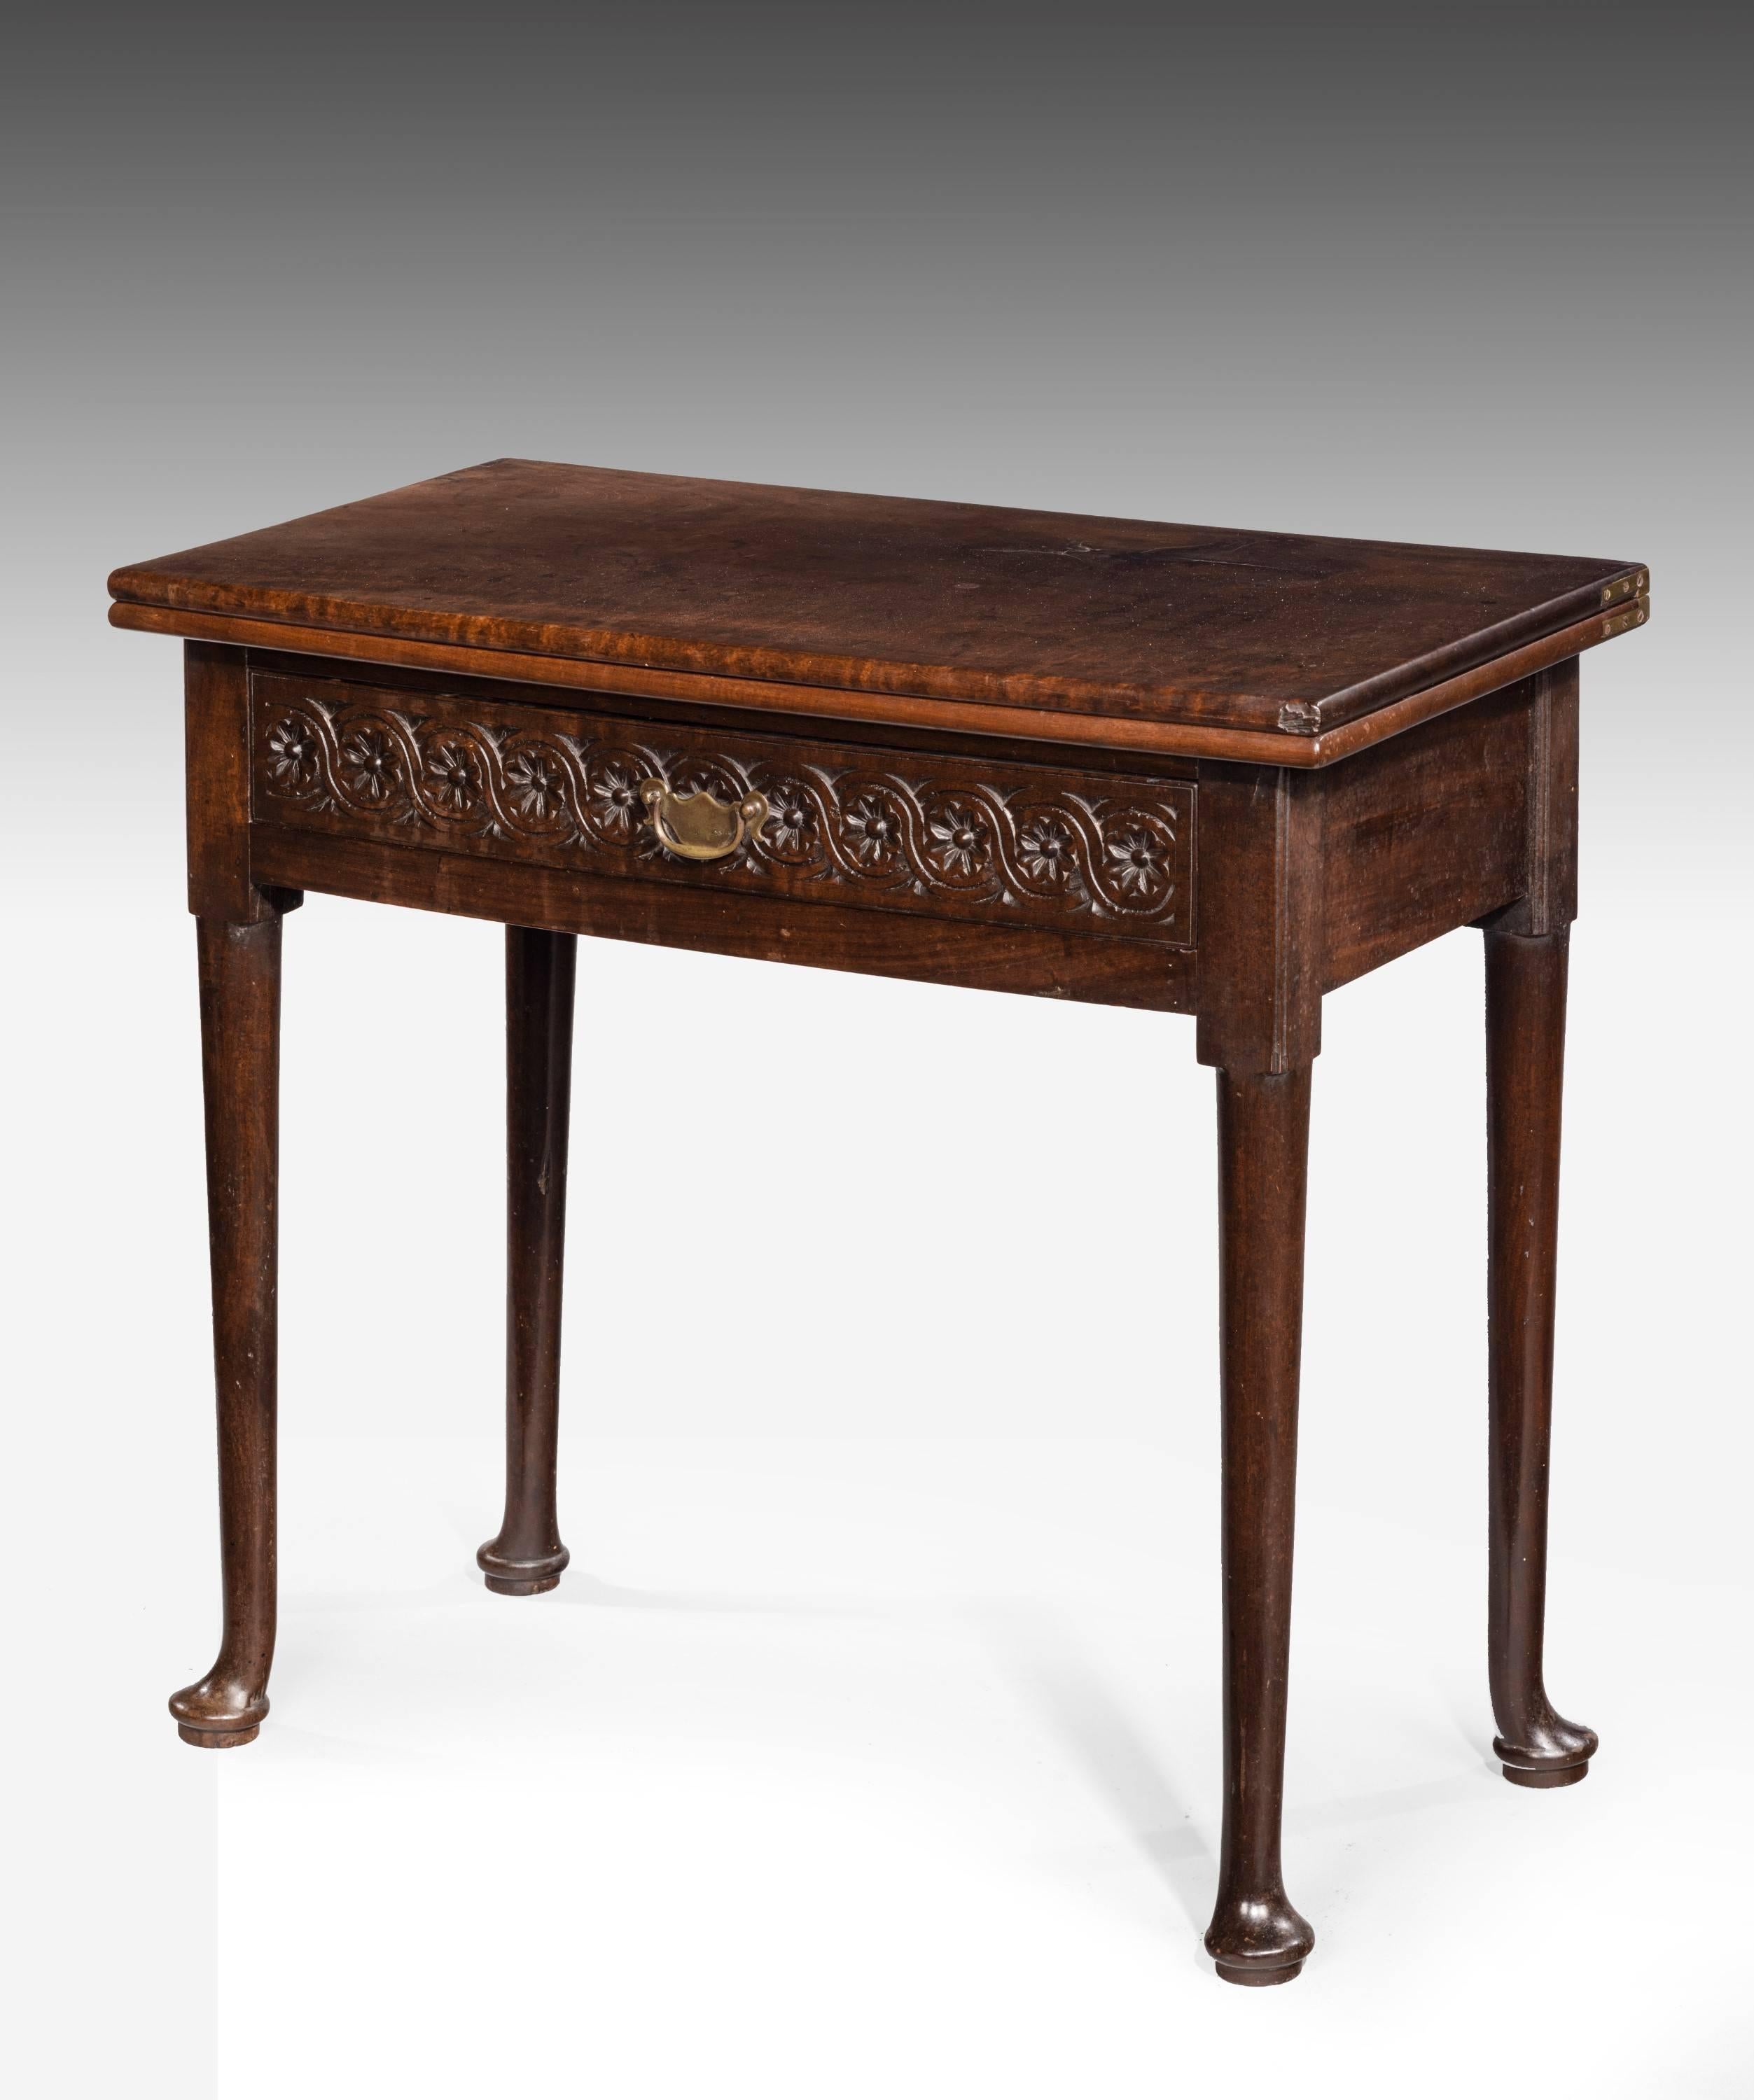 A small mid-18th century mahogany tea table. On gentle cabriole supports. The single drawer front with continuous carved frieze. Very good overall color and patina.